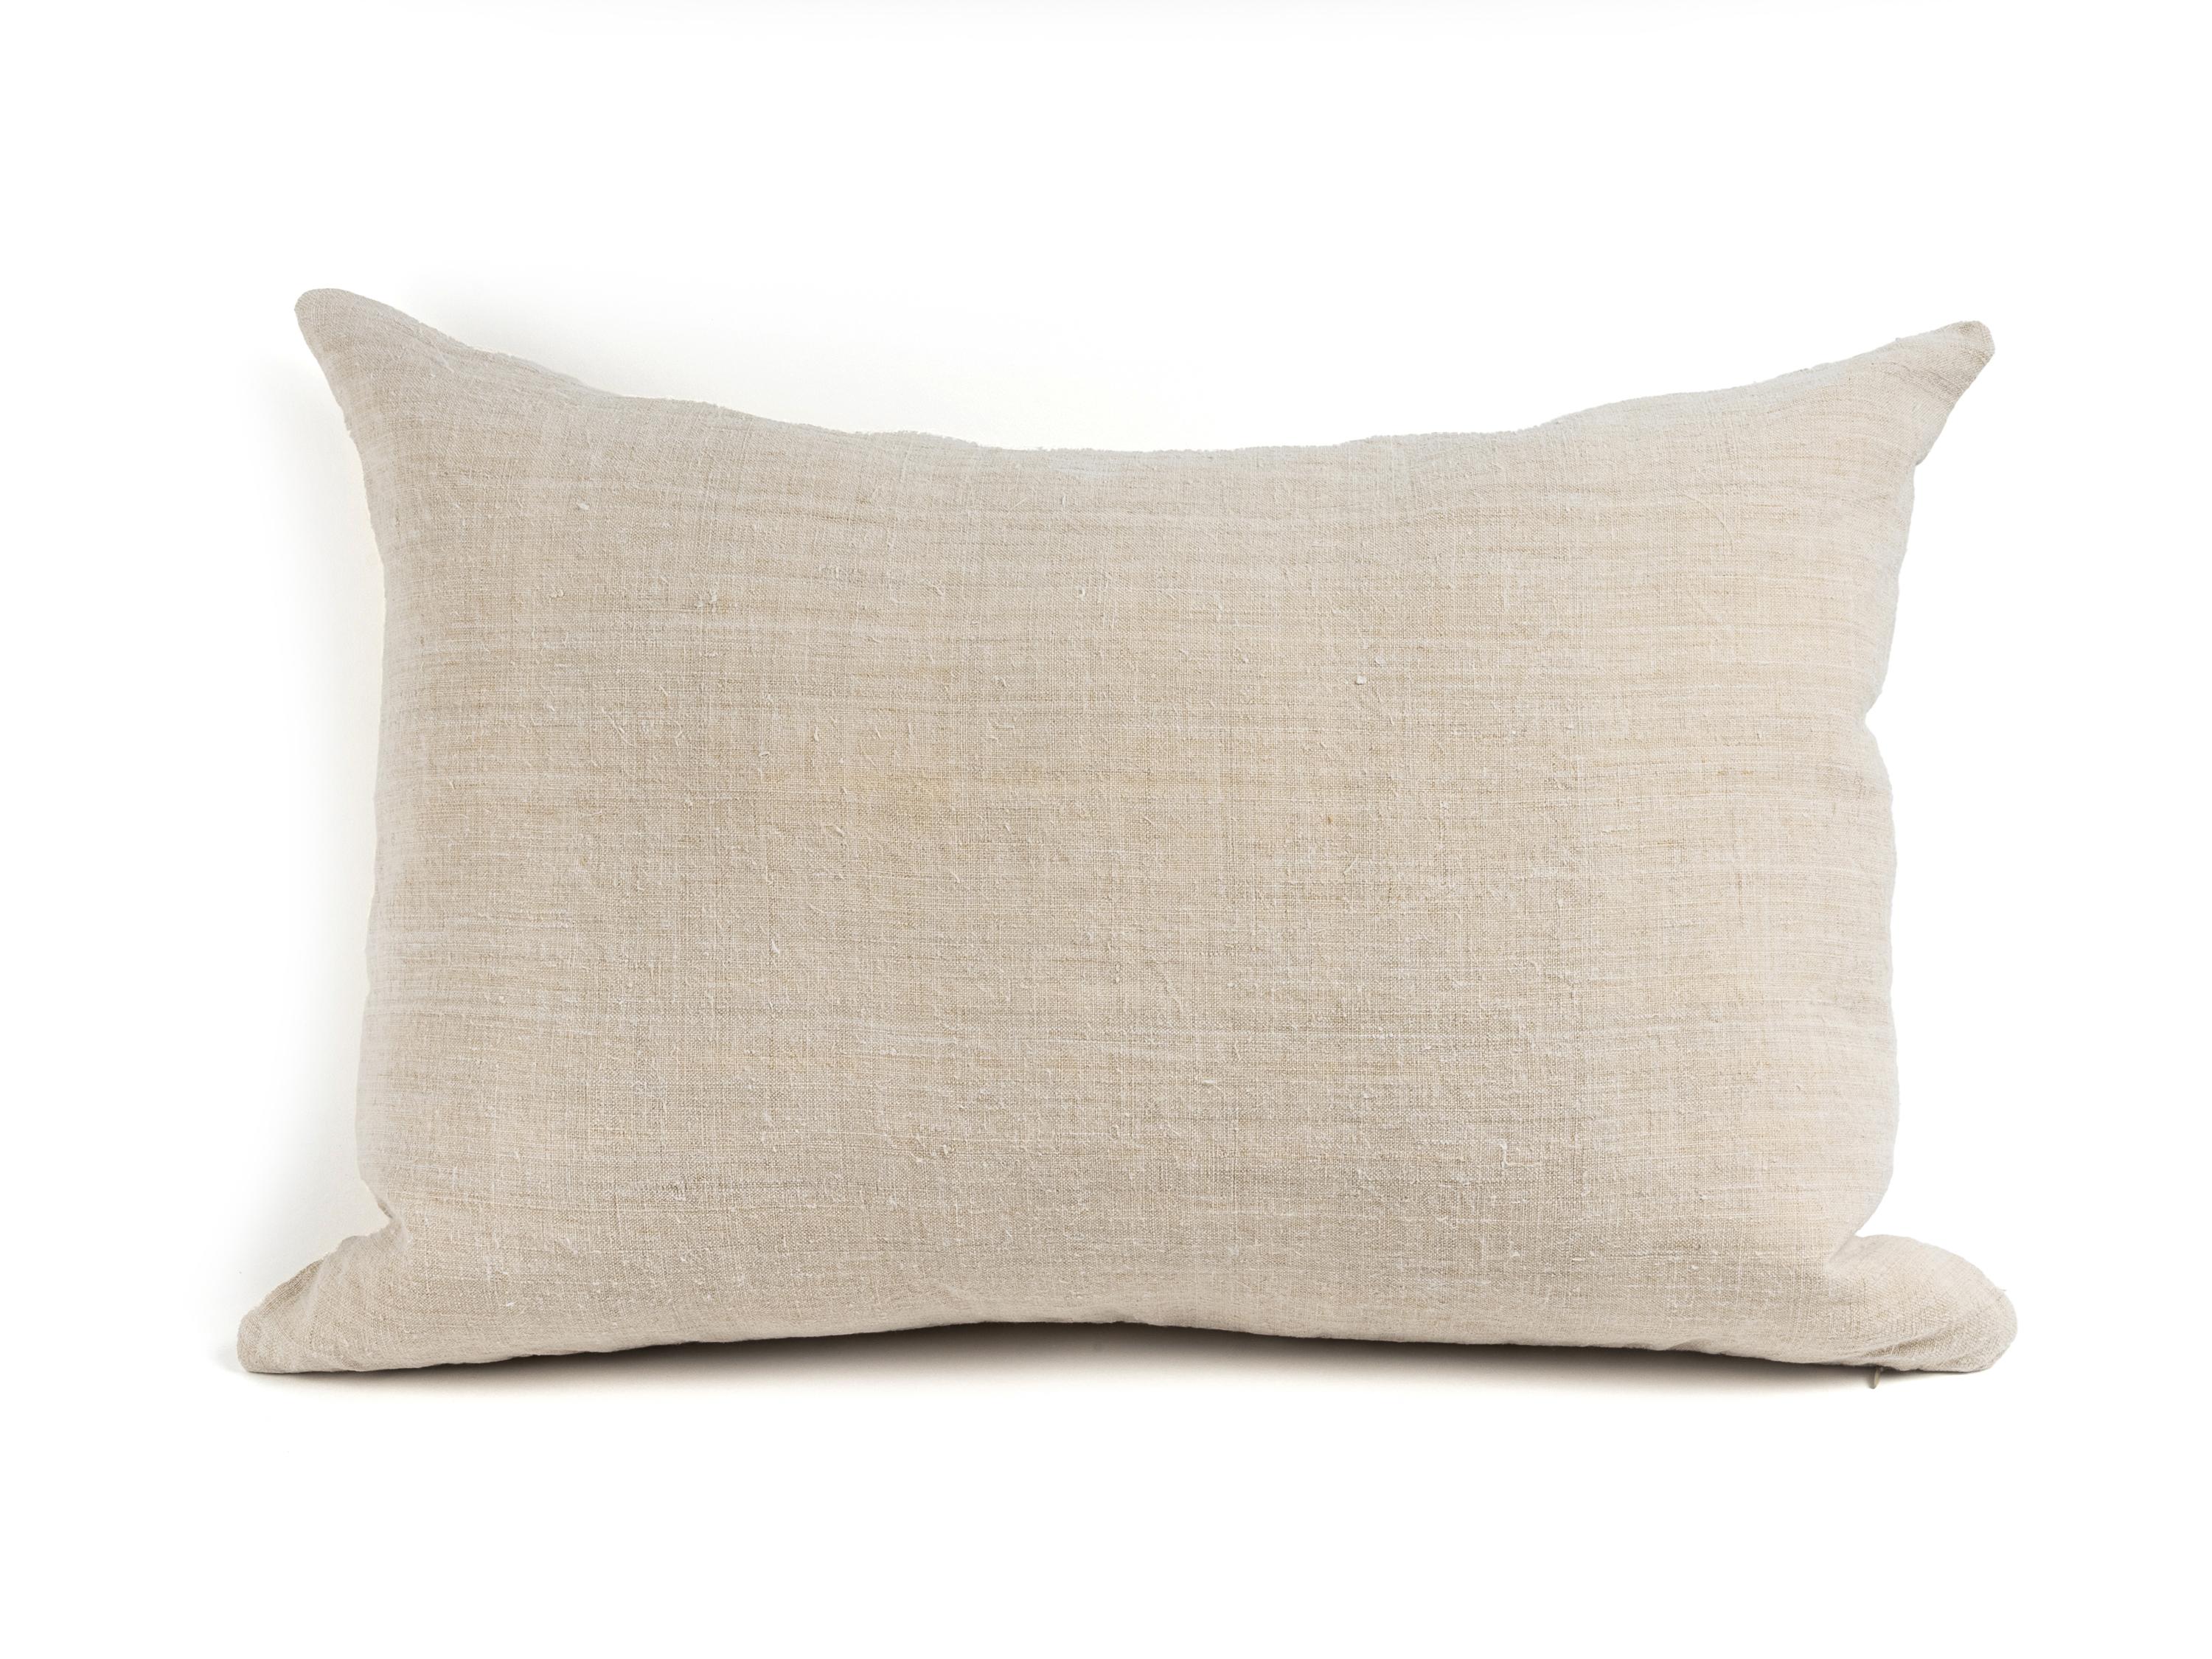 One pair of big through pillows made from pieces recovered from an antique and rustic hemp fabric sheet (First Half 20th century, France). Size: 70x50 cm. Color: Sand Beige. 
The second pair are two smaller cushions ideal for the lumbar made with